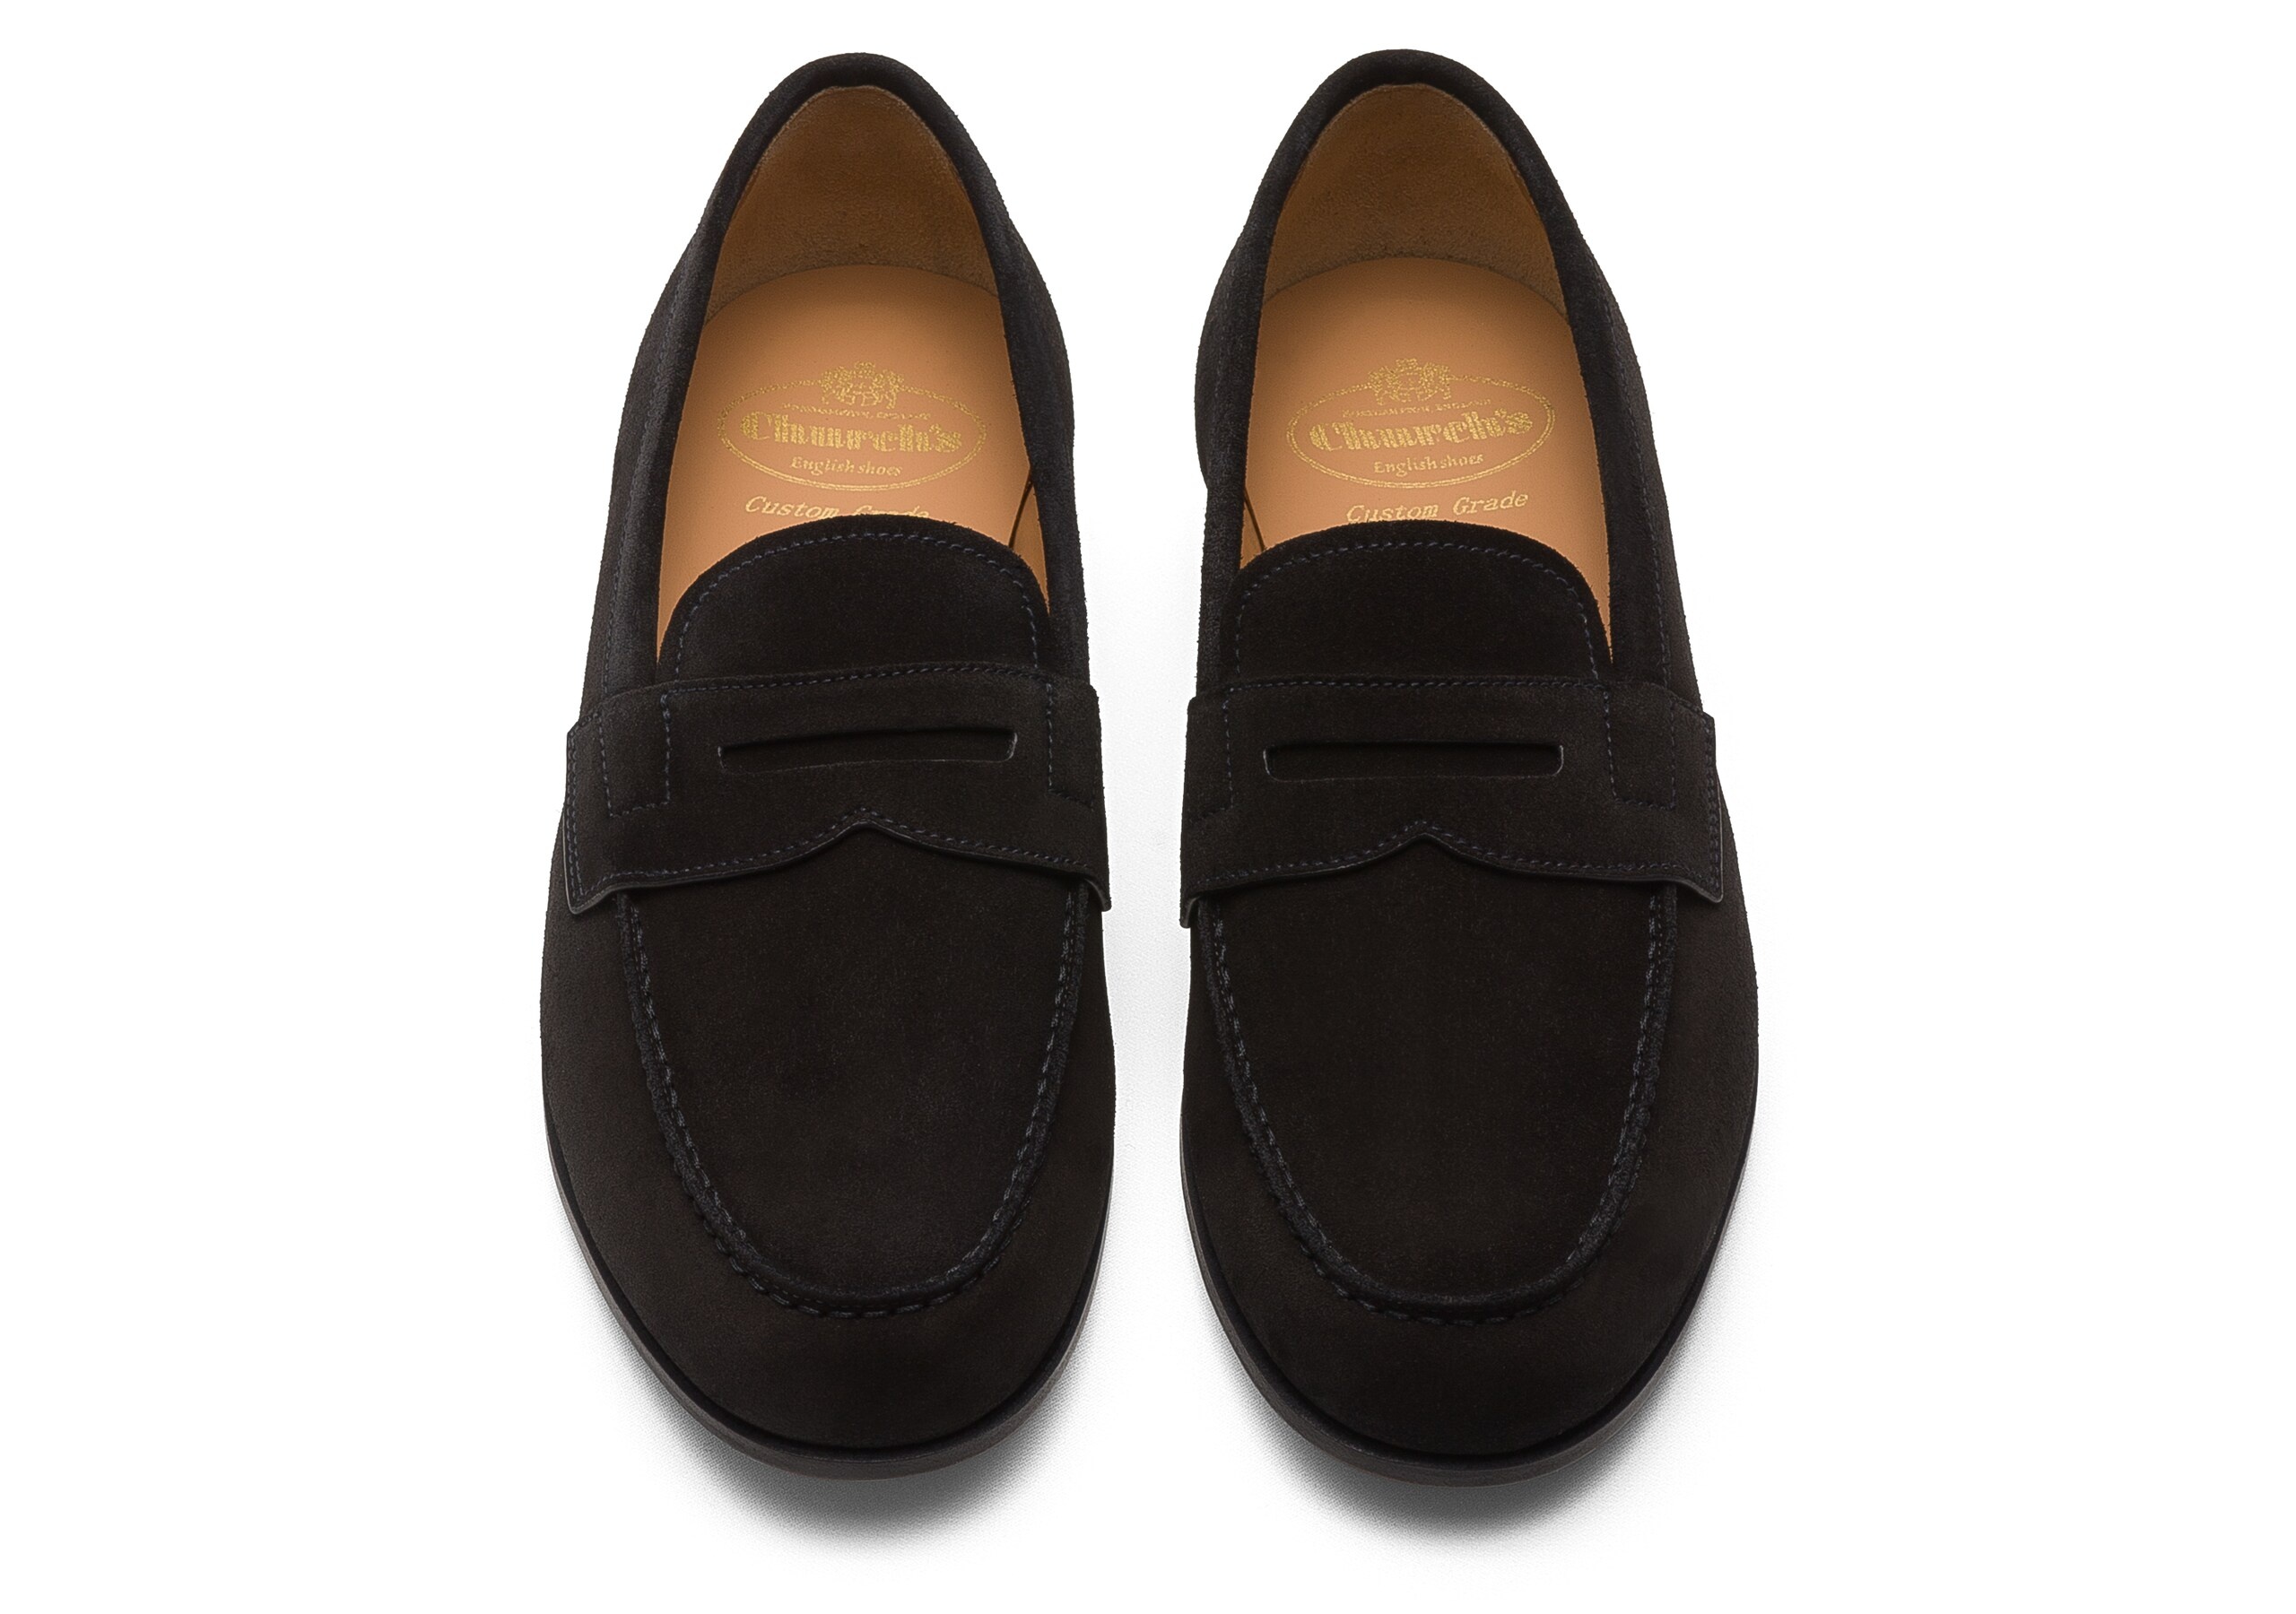 Heswall 2
Soft Suede Loafer Black - 3